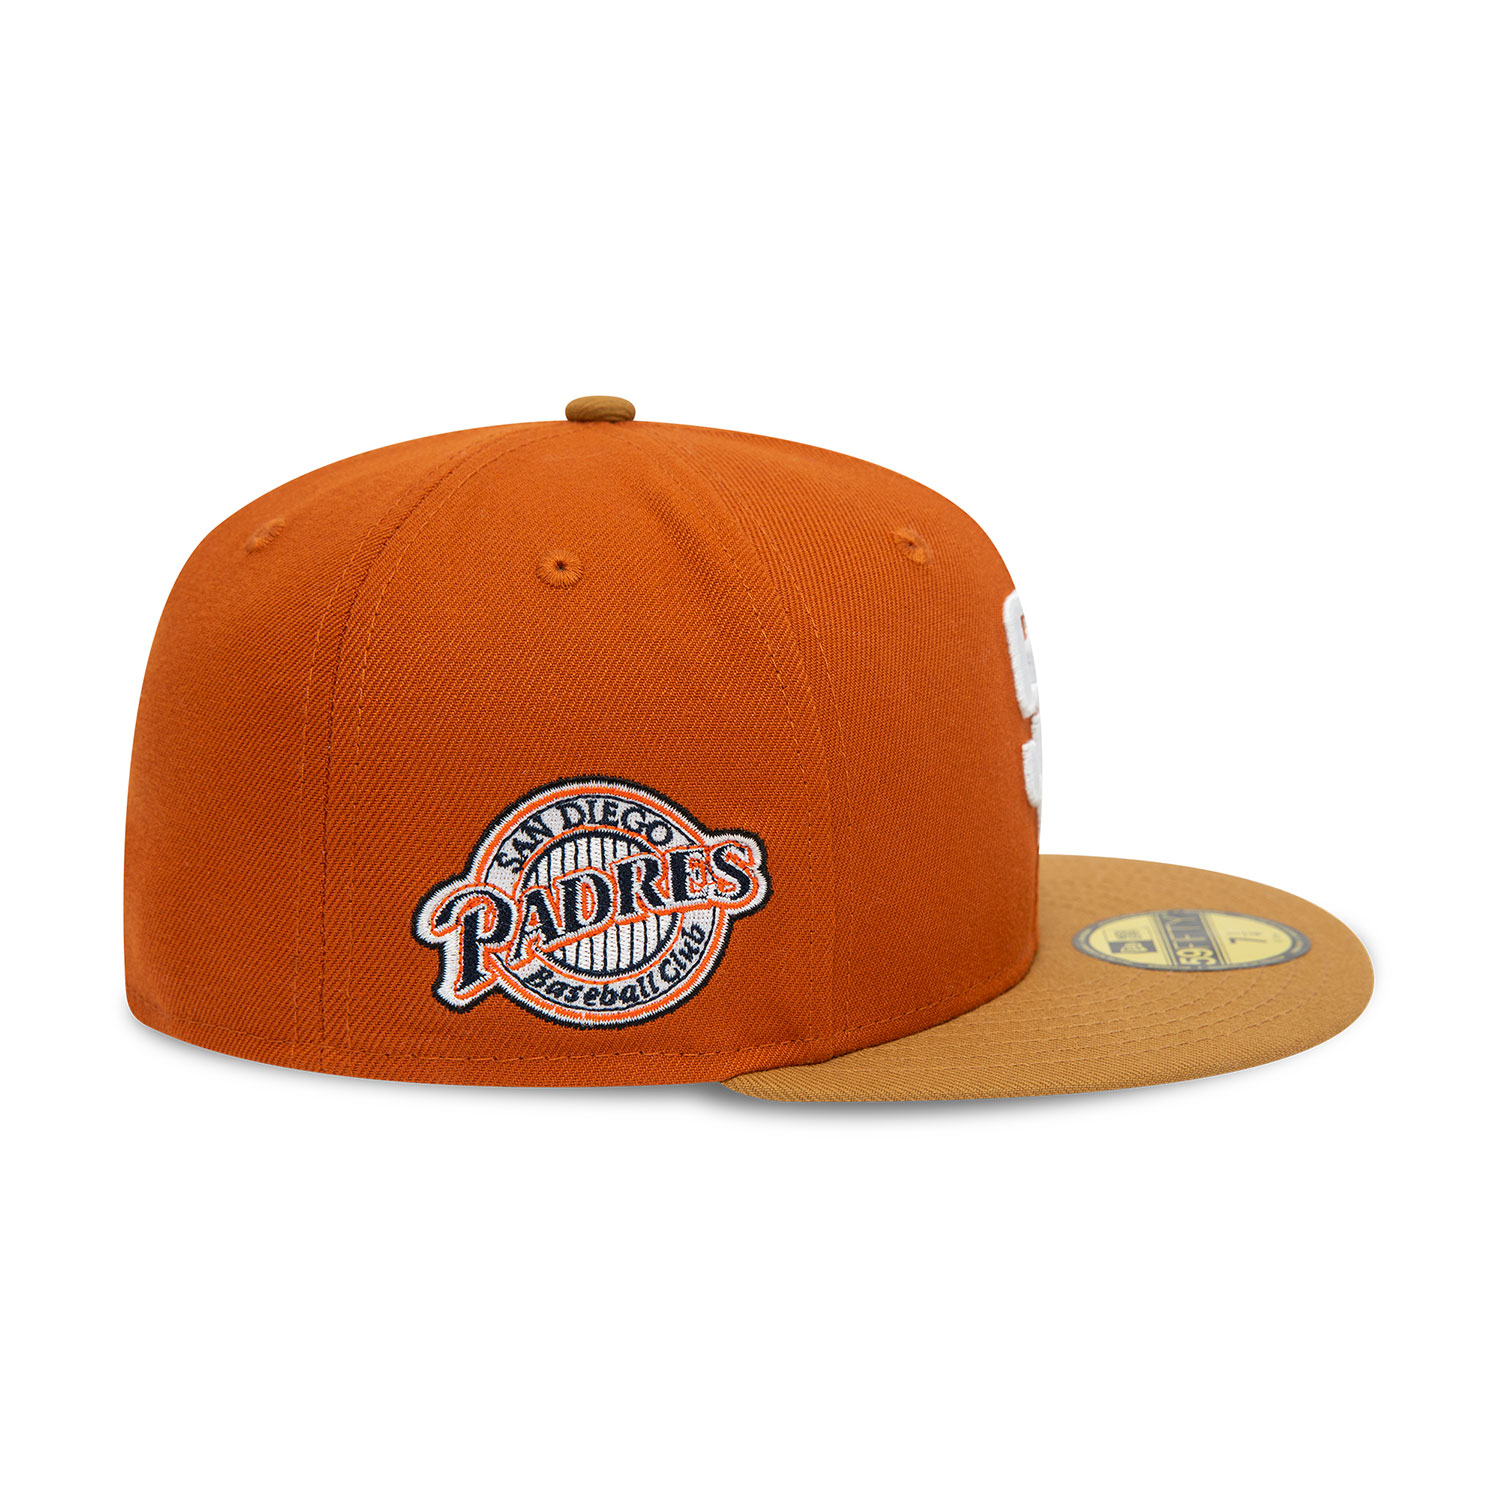 official-new-era-mlb-contrast-visor-fall-san-diego-padres-burnt-orange-59fifty-fitted-cap-b9629